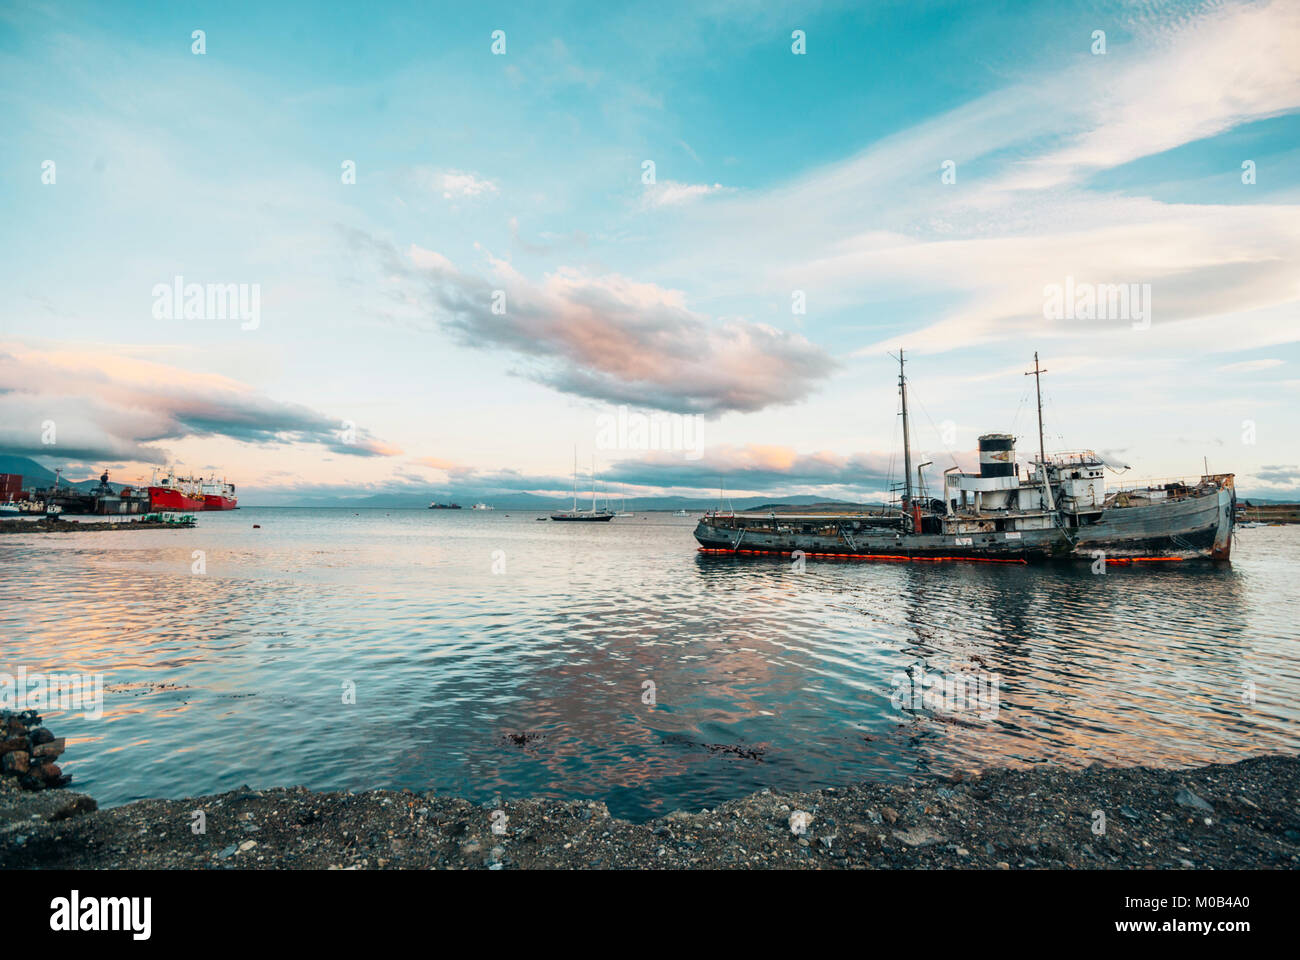 Shipwreck in the Ushuaia harbor with a dramatic sky in the background, Ushuaia Tierra del Fuego Argentina Stock Photo